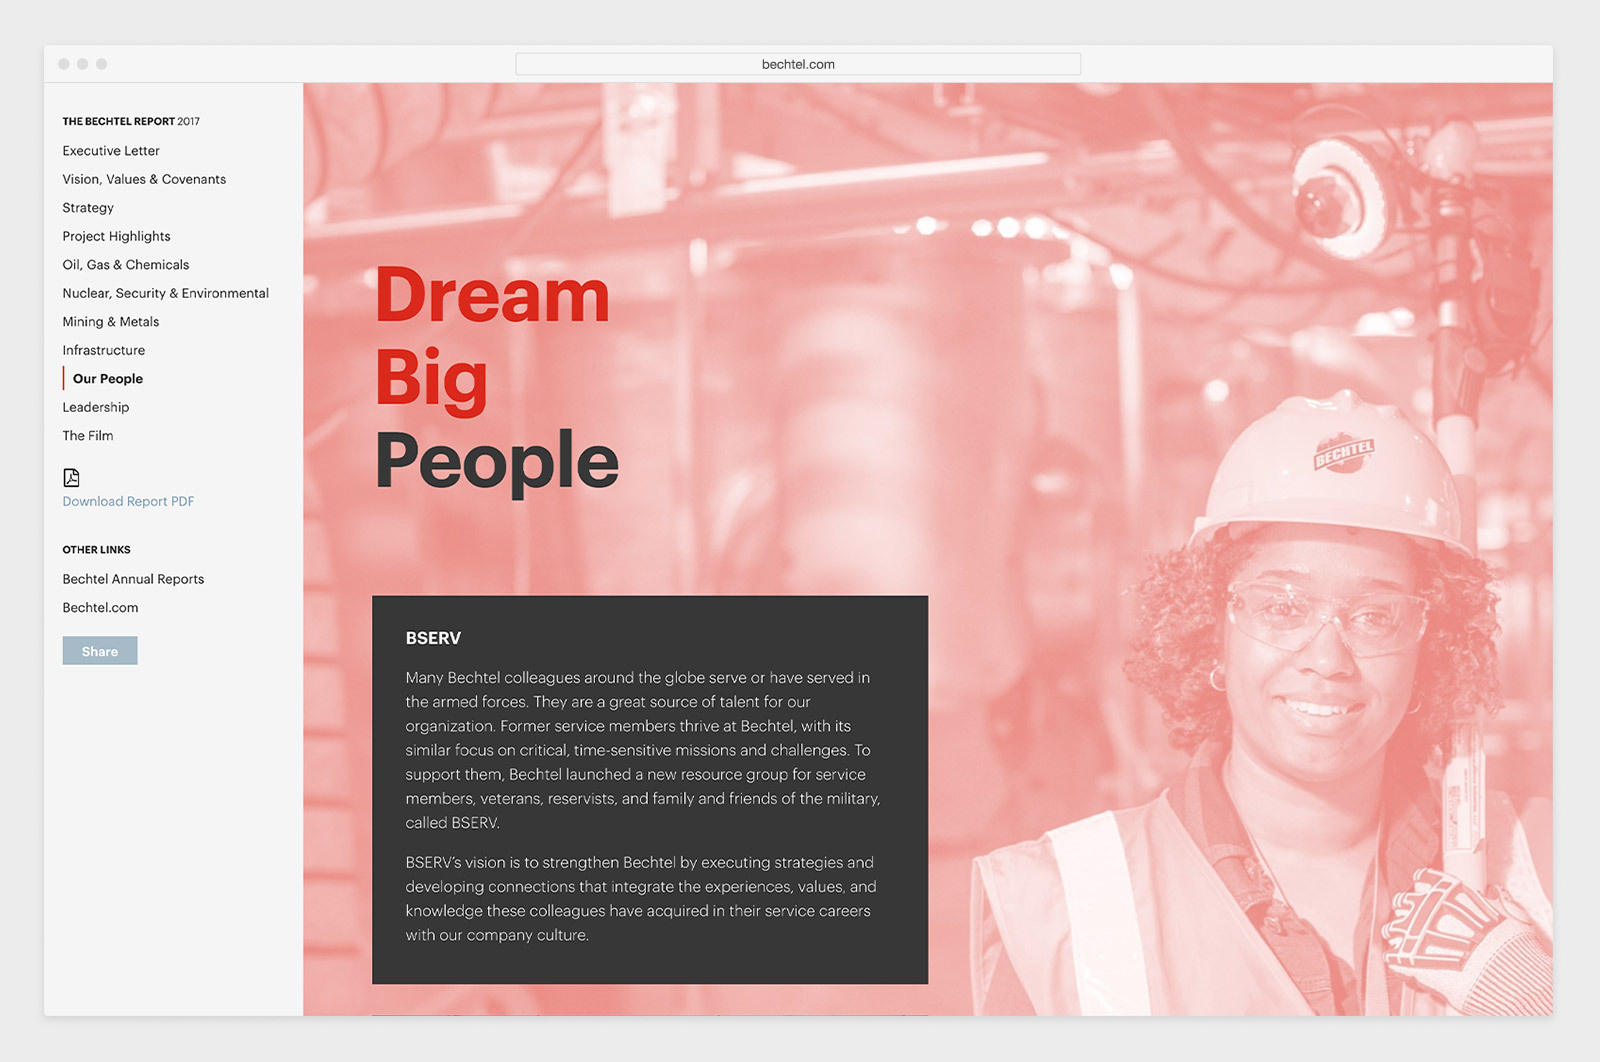 Web browser view from the interactive digital 2017 Bechtel annual report design, with photo of employee wearing a hardhat